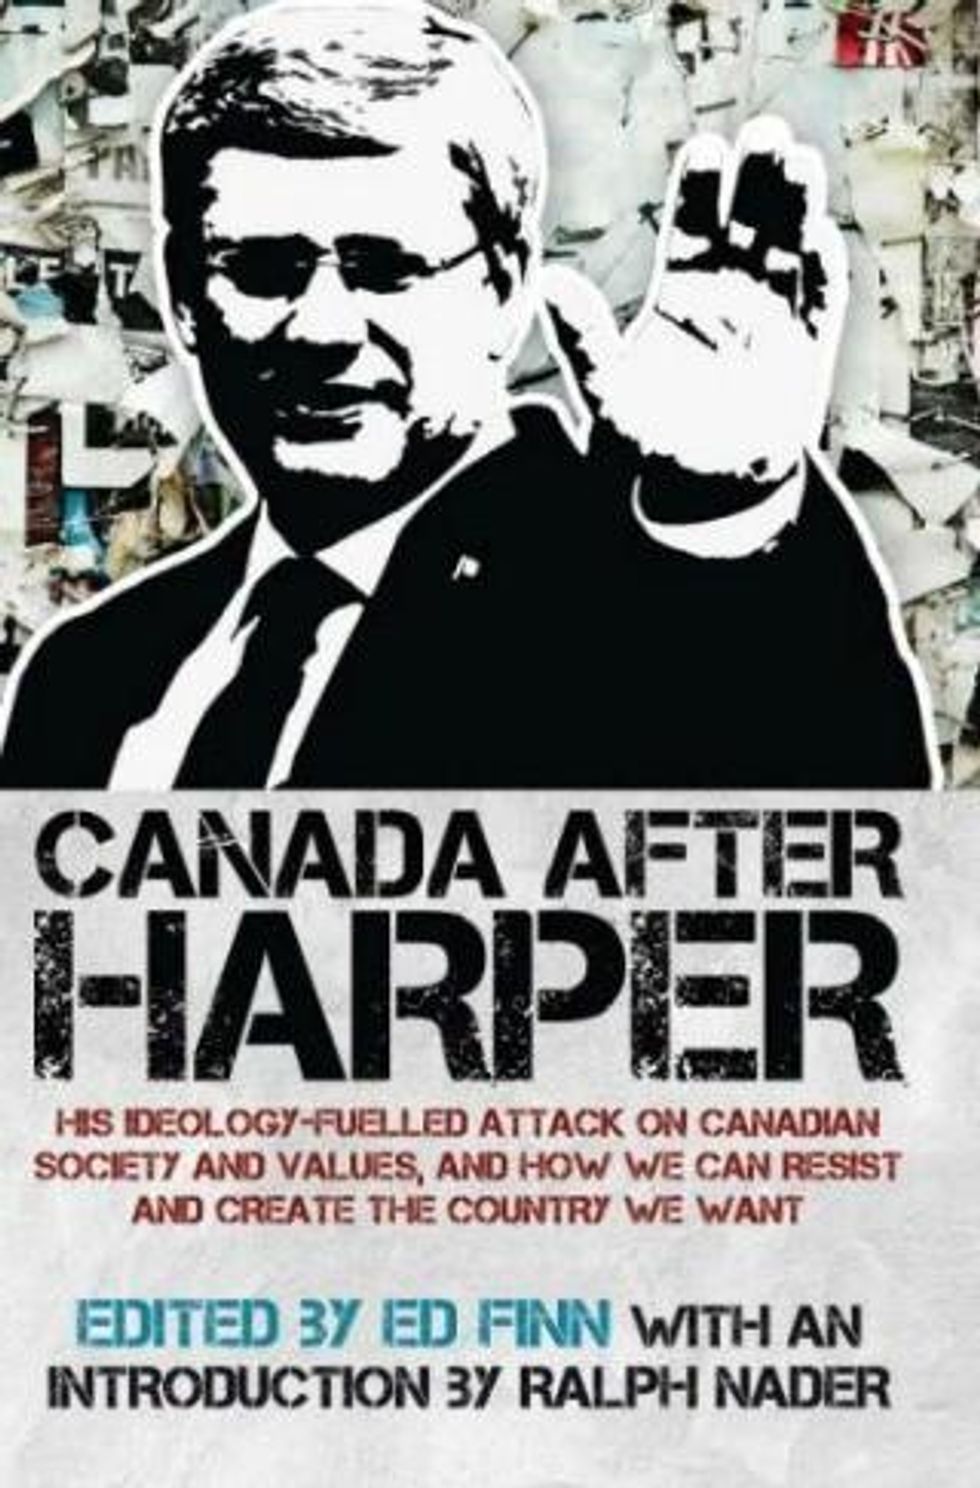 Canada after Harper: His ideology-fuelled attack on Canadian society and values, and how we can resist and create the country we want by Edited by Ed Finn (Lorimer, 2015; $22.95)